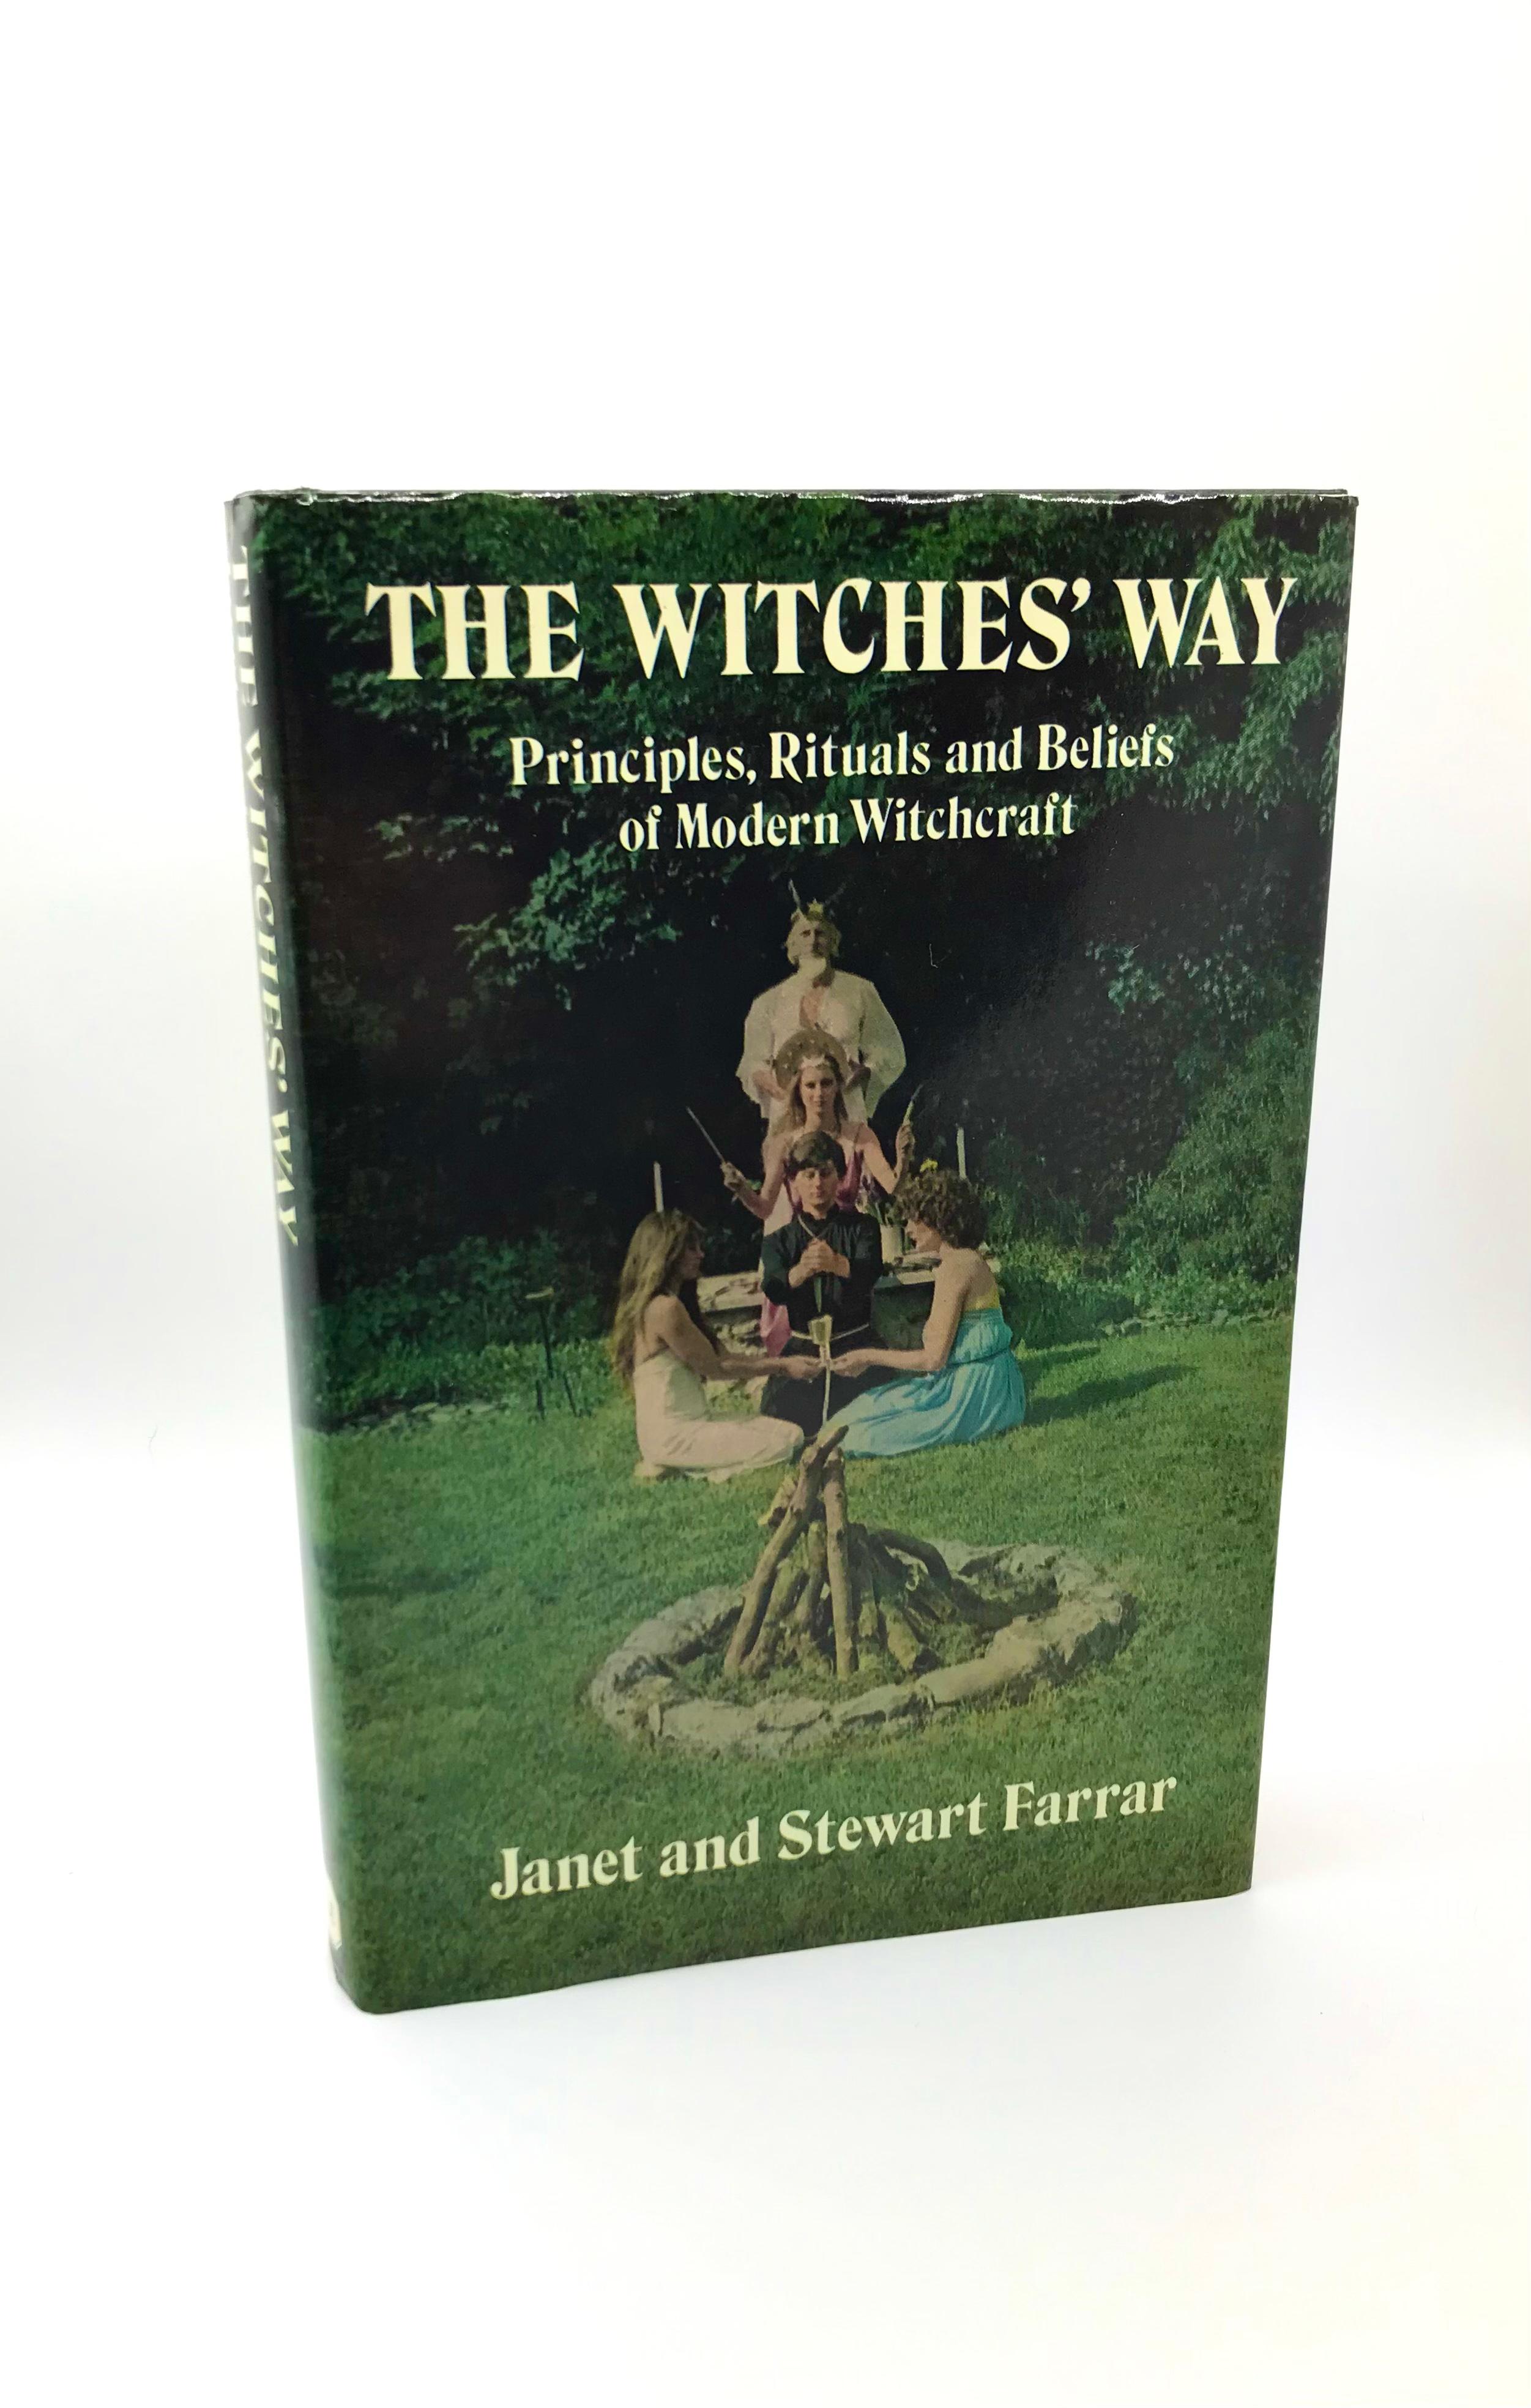 The Witches Way by Janet and Stewart Farrar, Inscribed